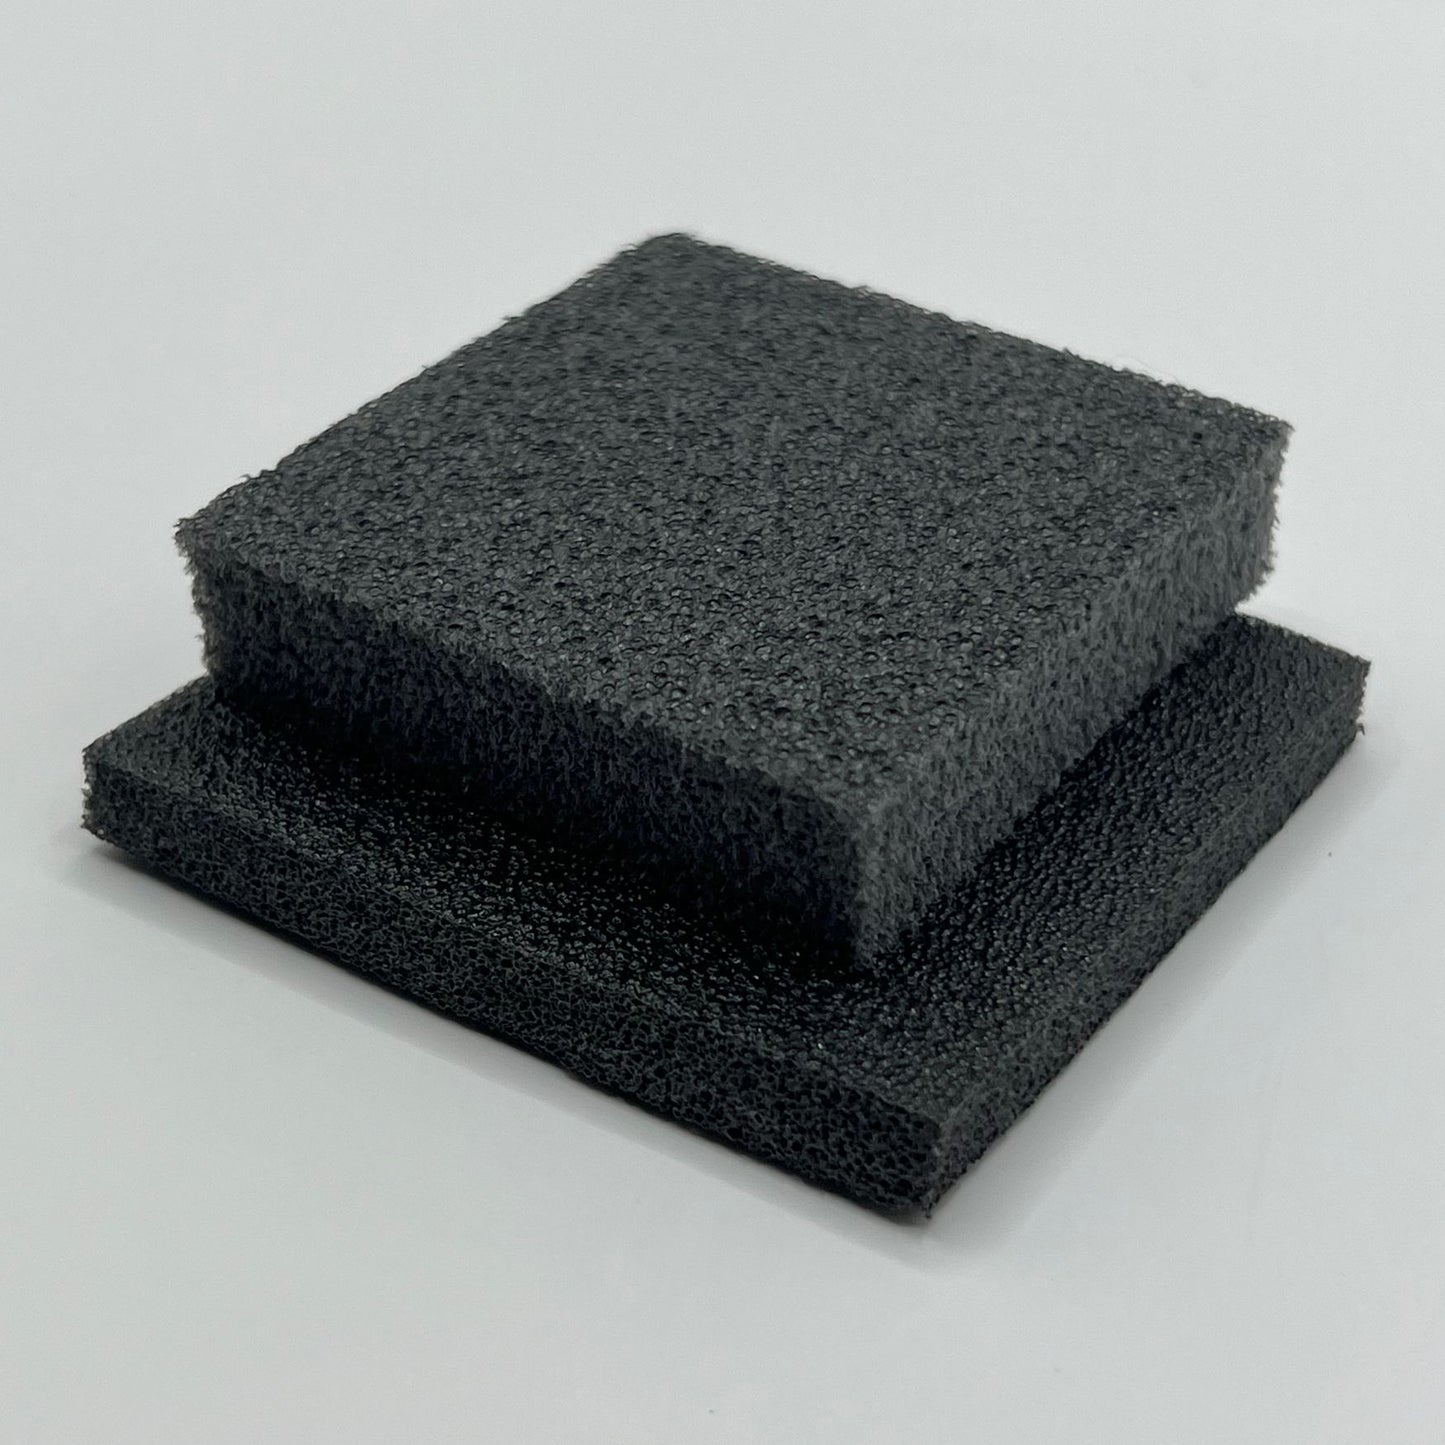 polyethyline soundproofing layer - charcoal color